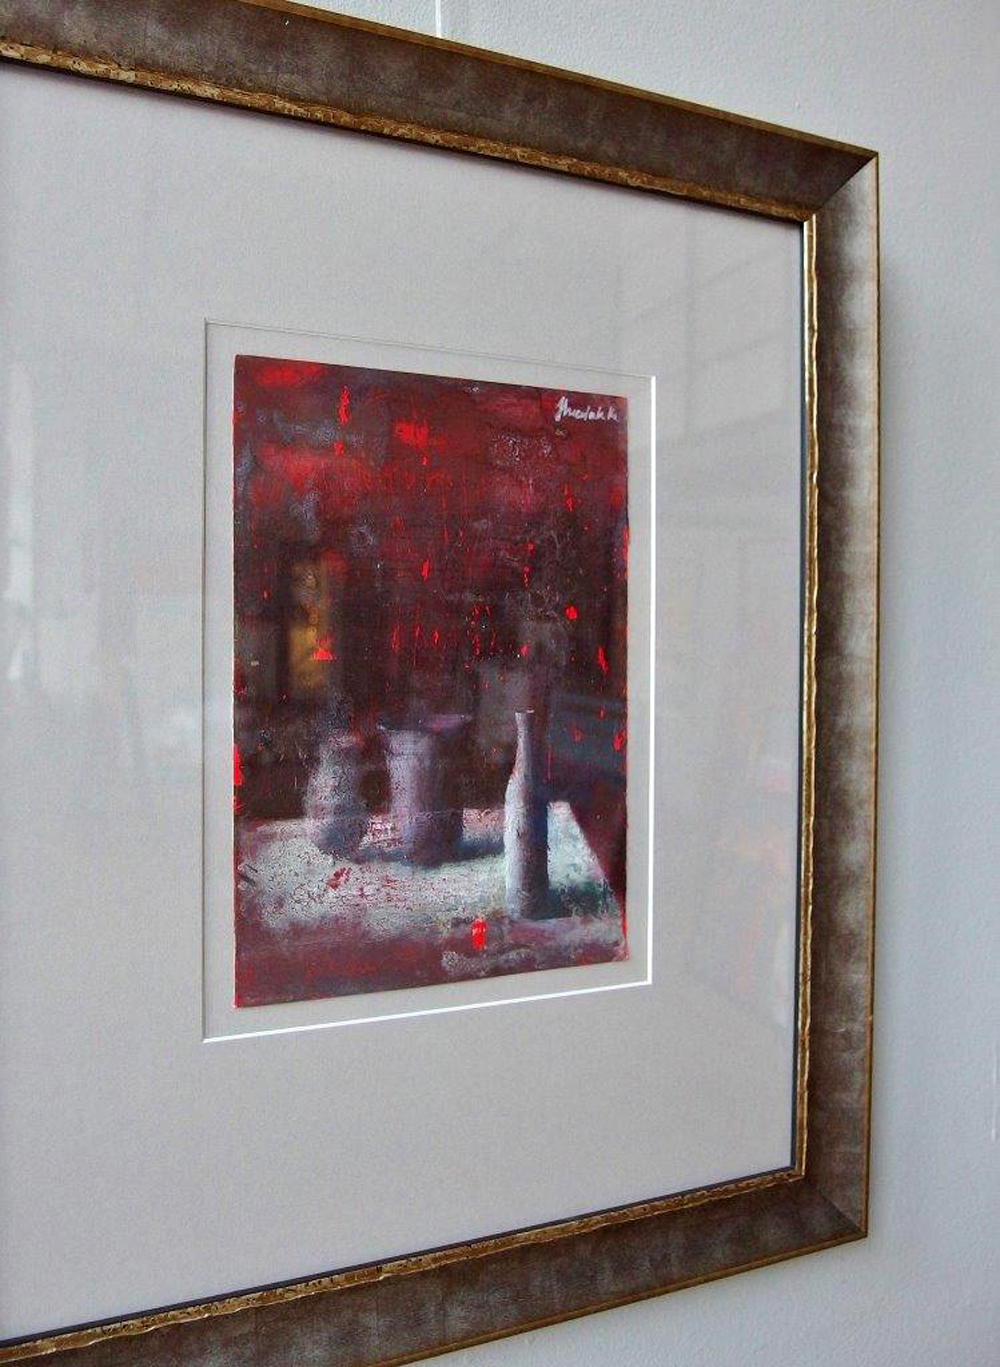 Łukasz Huculak - Composition with drops of red (Tempera on paper | Wymiary: 40 x 48 cm | Cena: 3500 PLN)